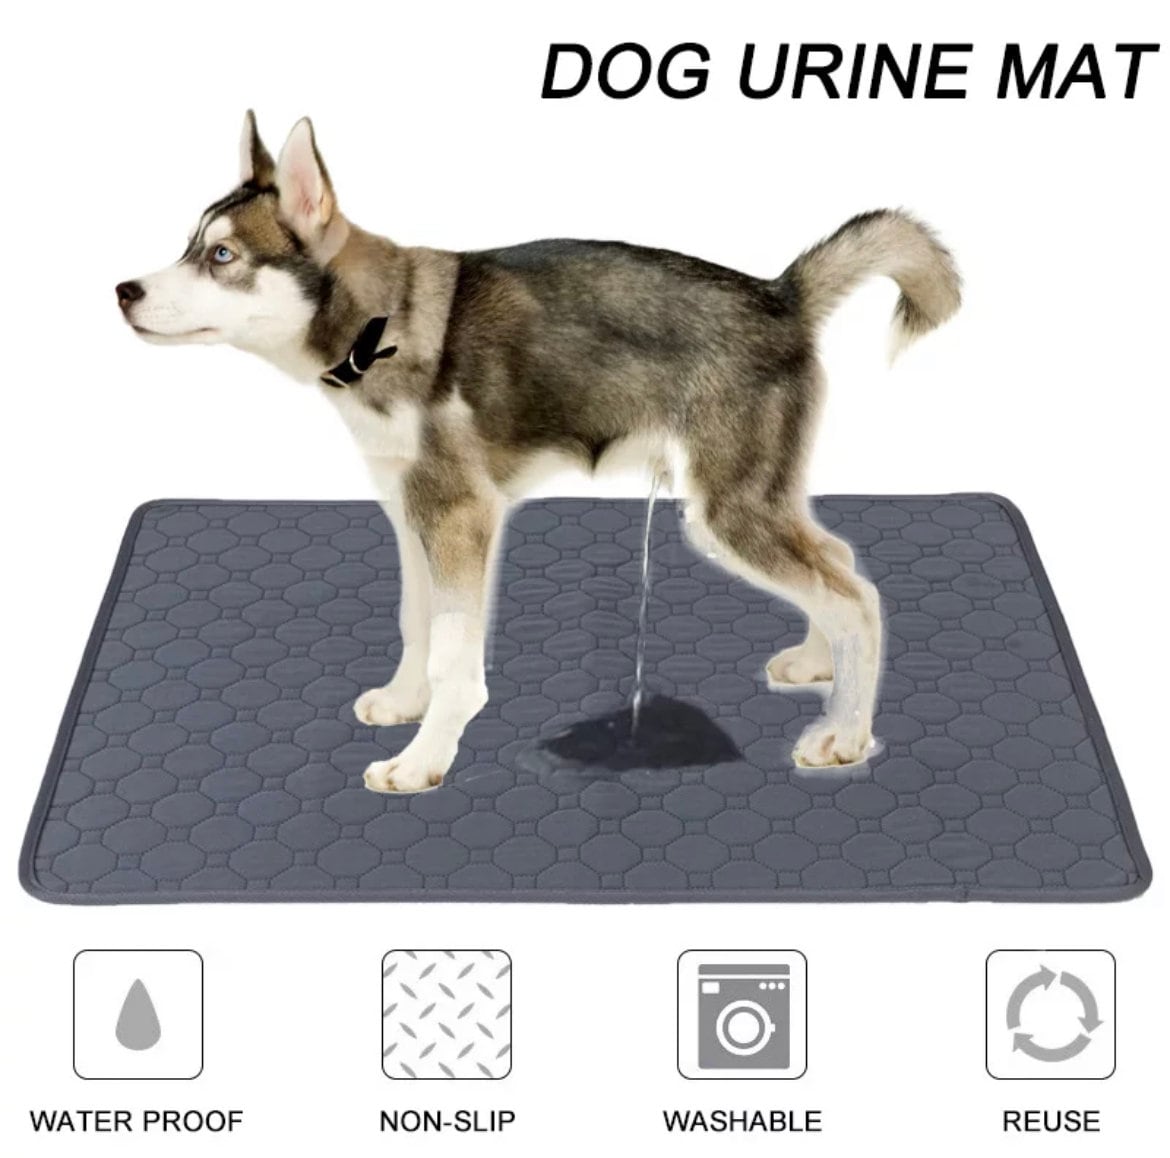 Dog Pee Pad Blanket Reusable Absorbent Diaper Washable Puppy Training Pad  Pet Bed Urine Mat Car Seat Cover For Pet - Dog Beds/mats - AliExpress